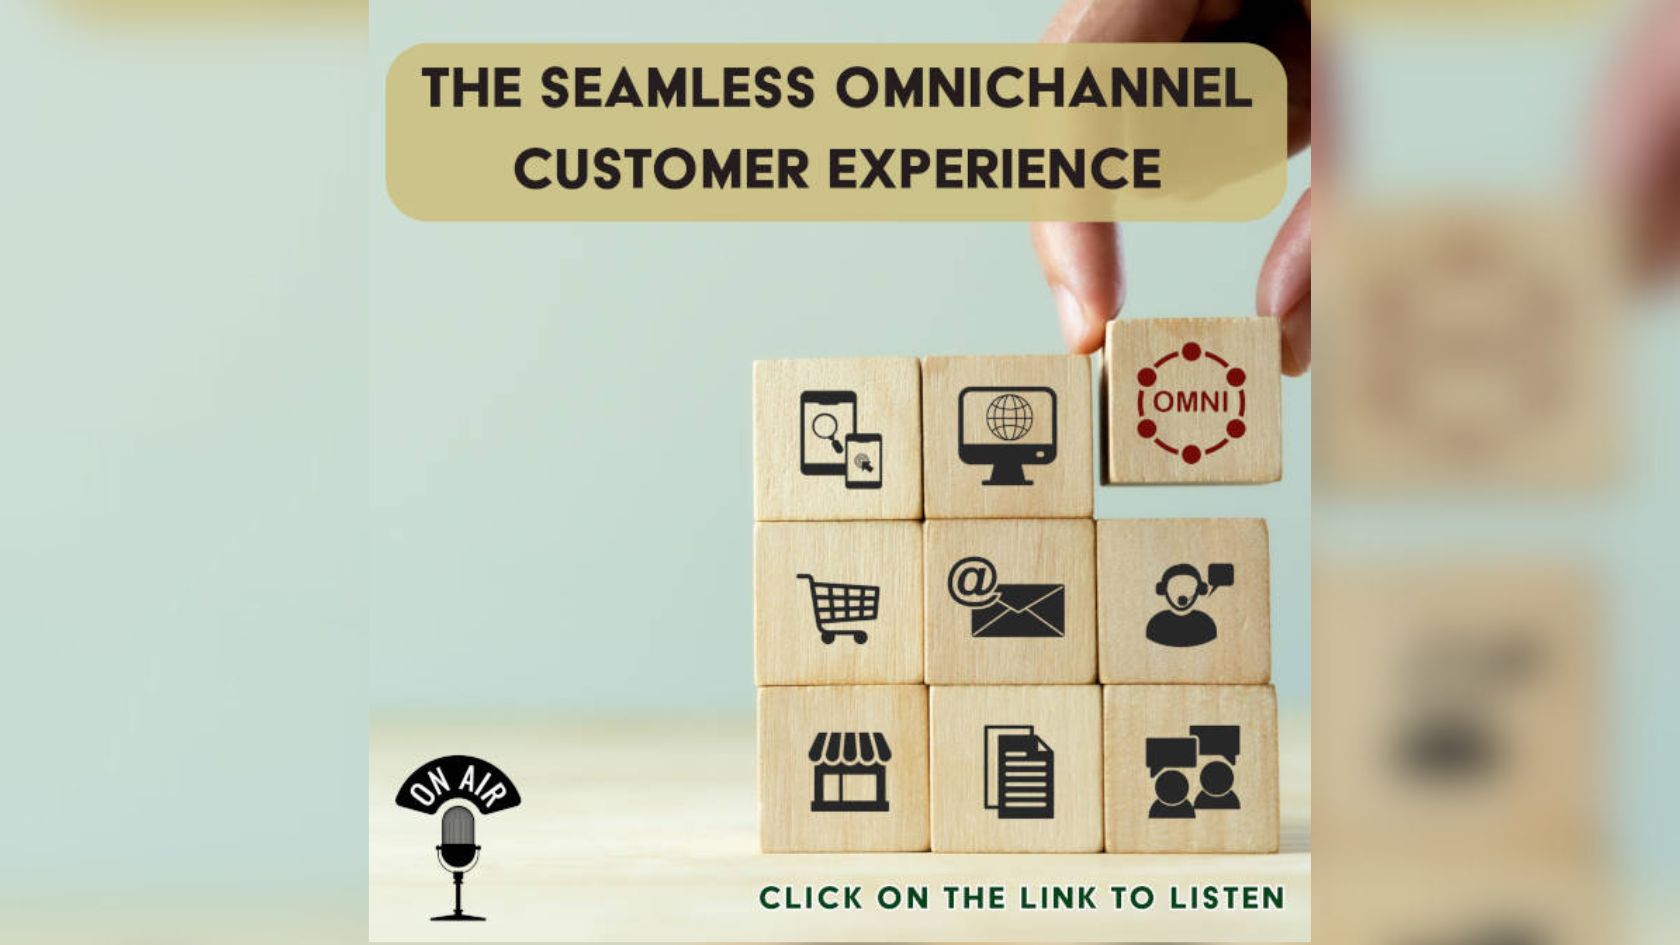 The Seamless Omnichannel